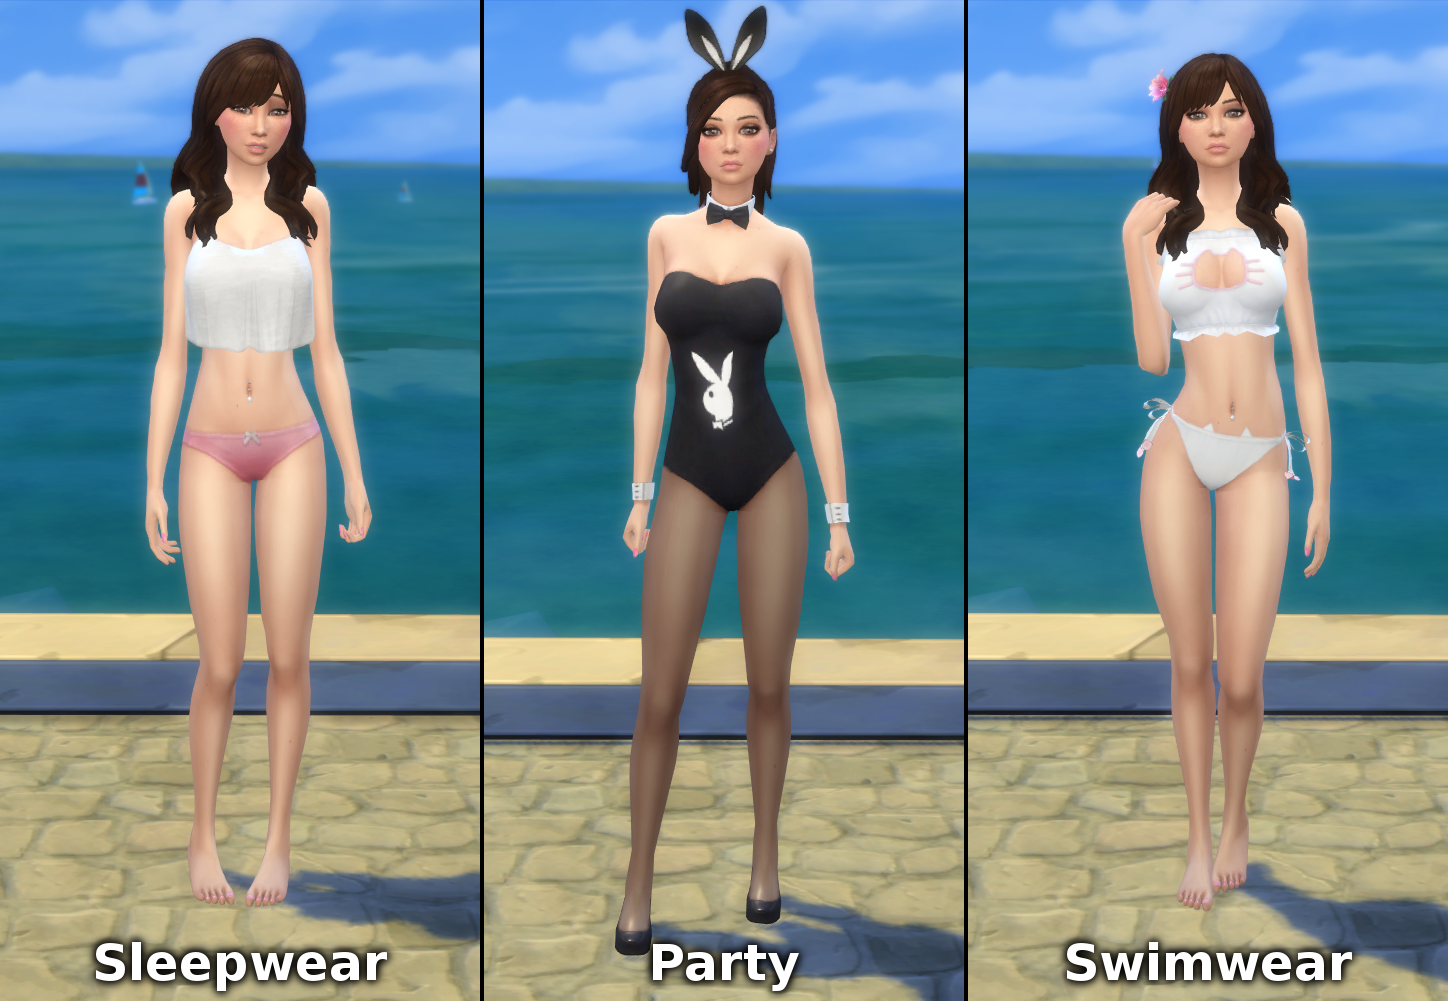 [sims 4] Erplederp S Hot Sims Sexy Sims For Your Whims 04 05 19 Added Lara Croft Sims